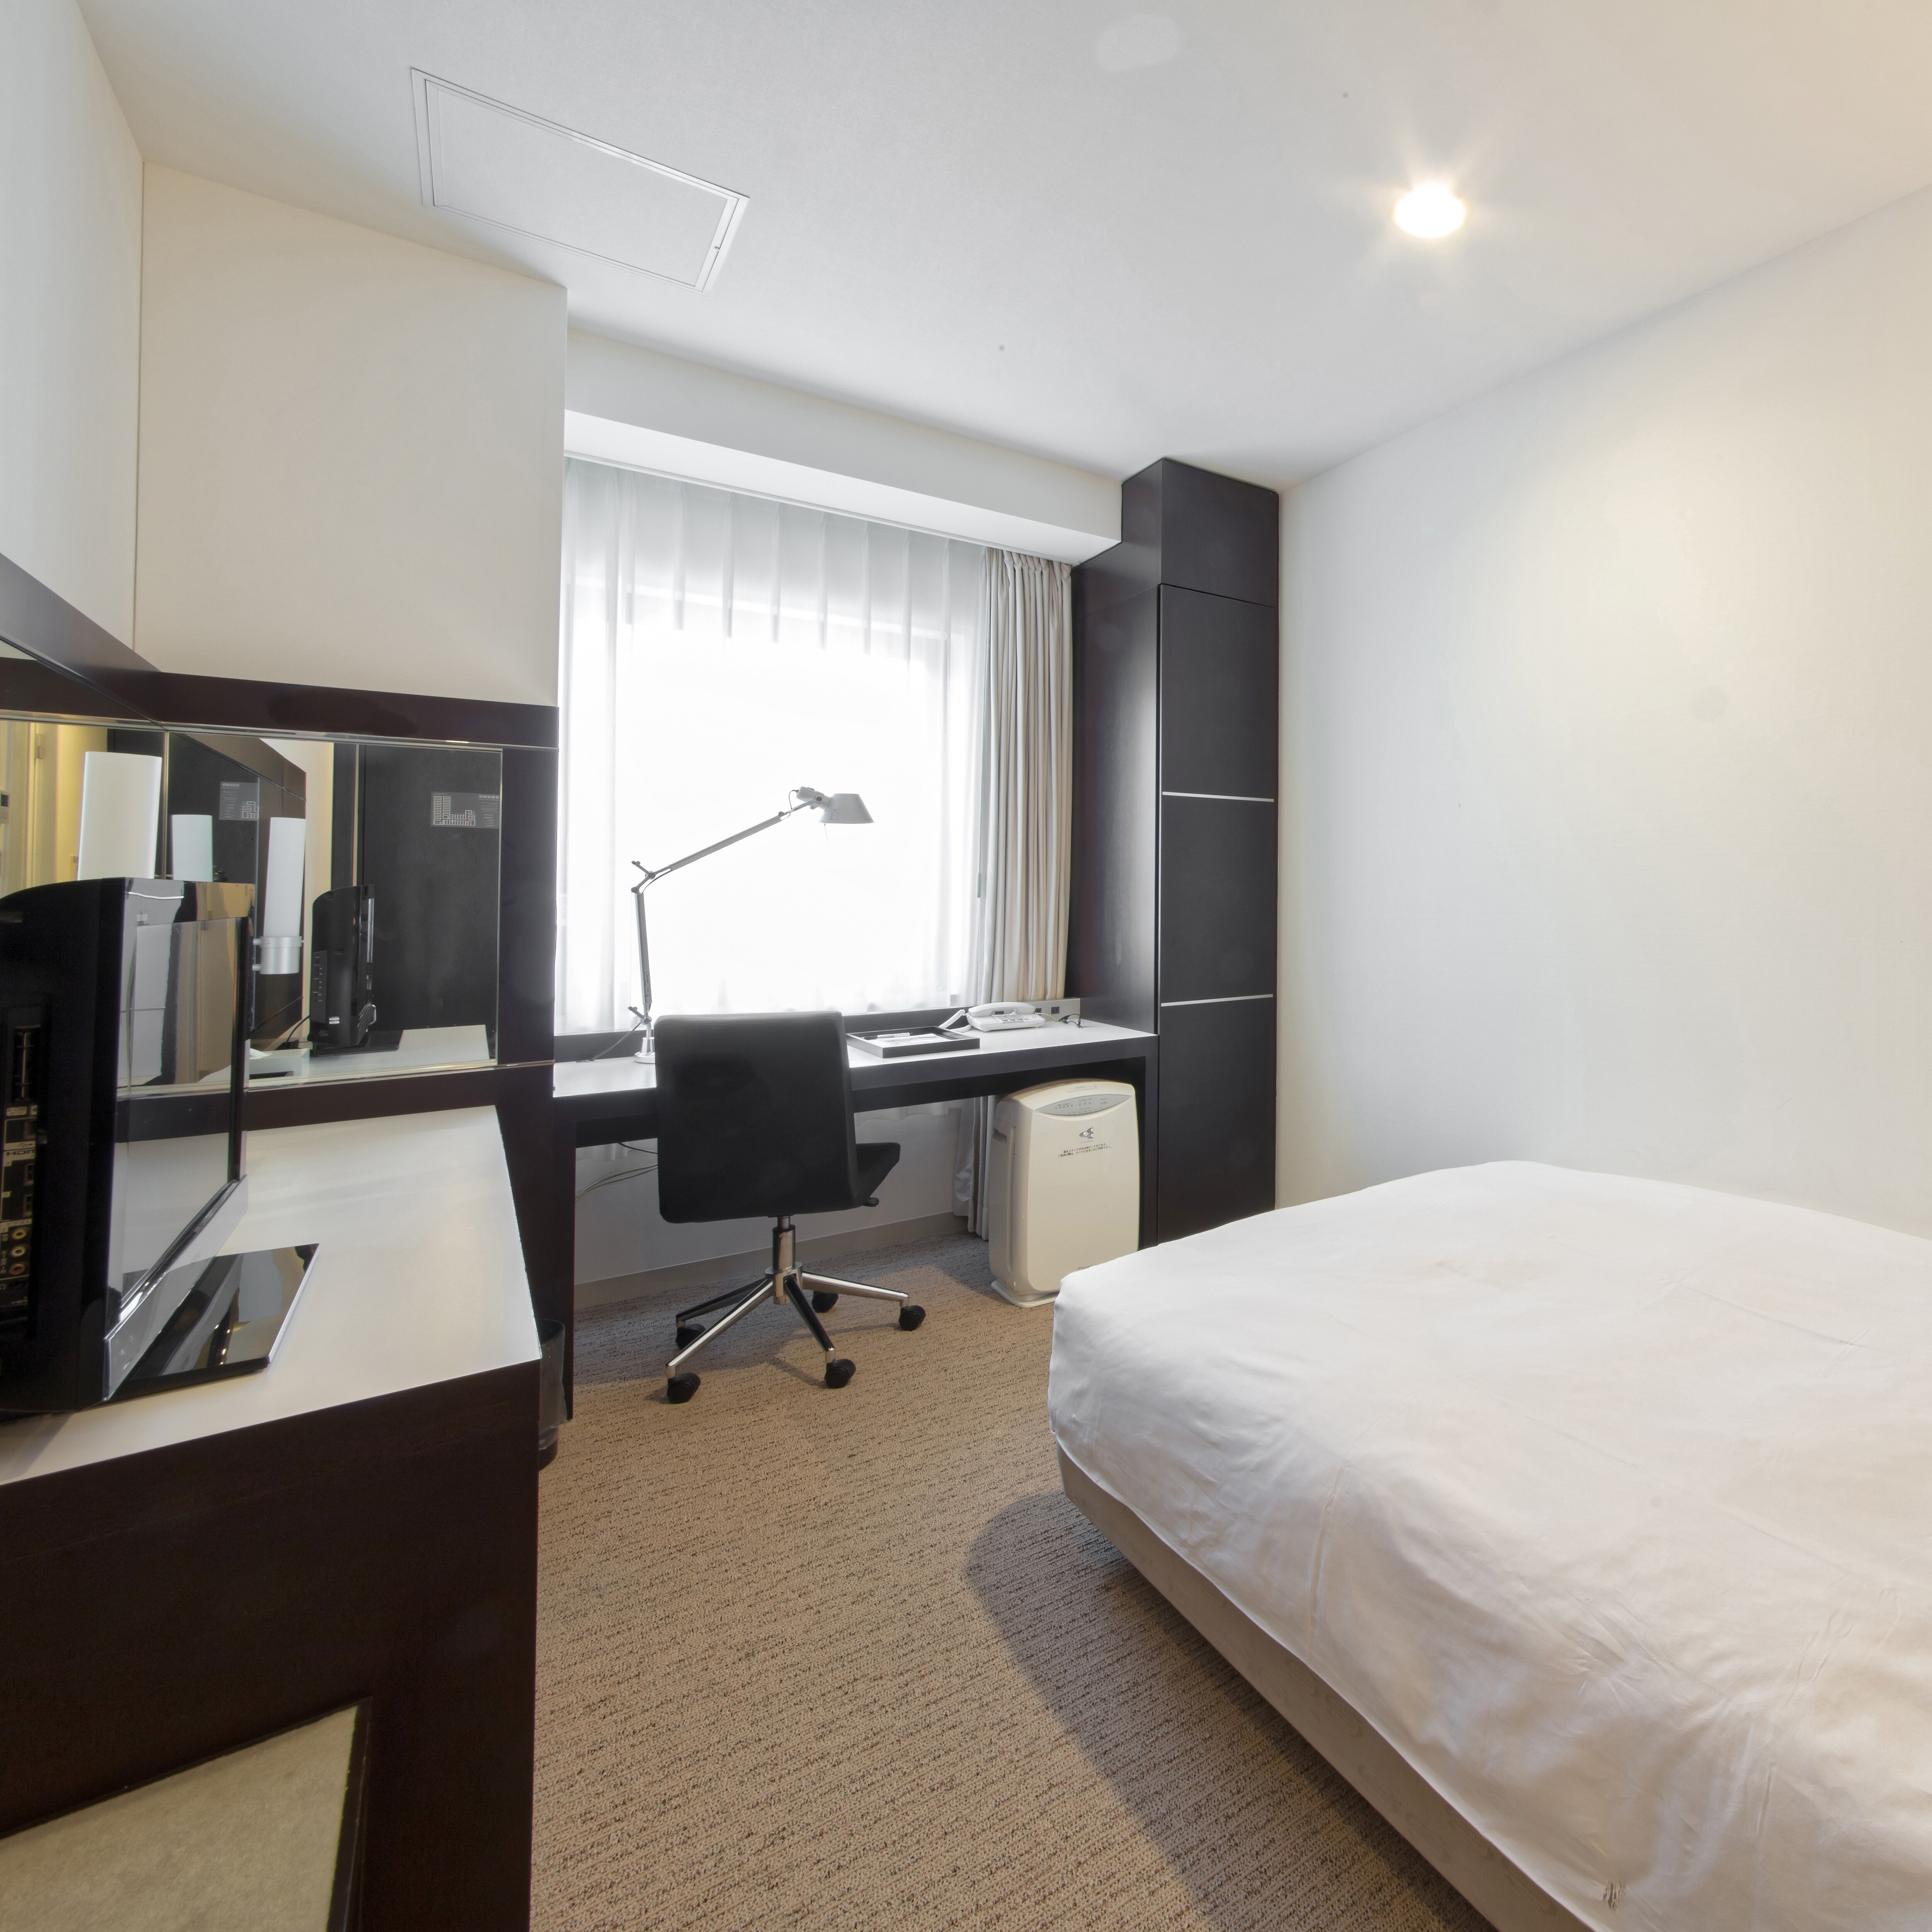 Single room (16㎡) ☆ Equipped with wide size Simmons bed!